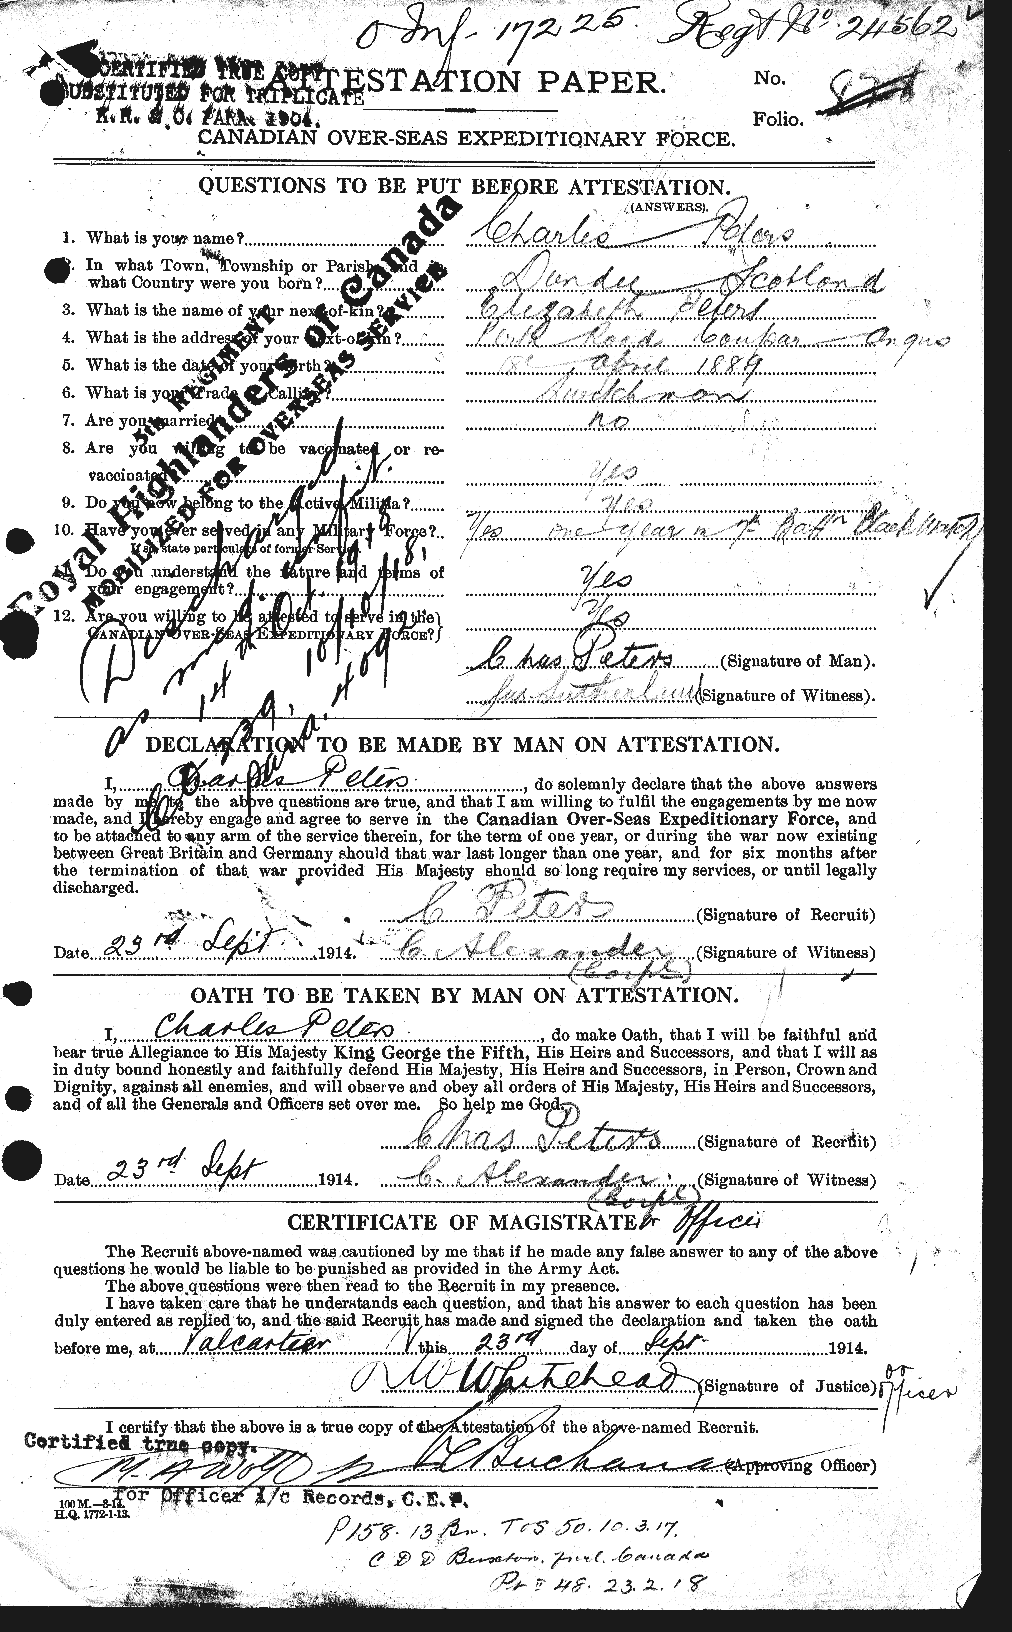 Personnel Records of the First World War - CEF 575366a